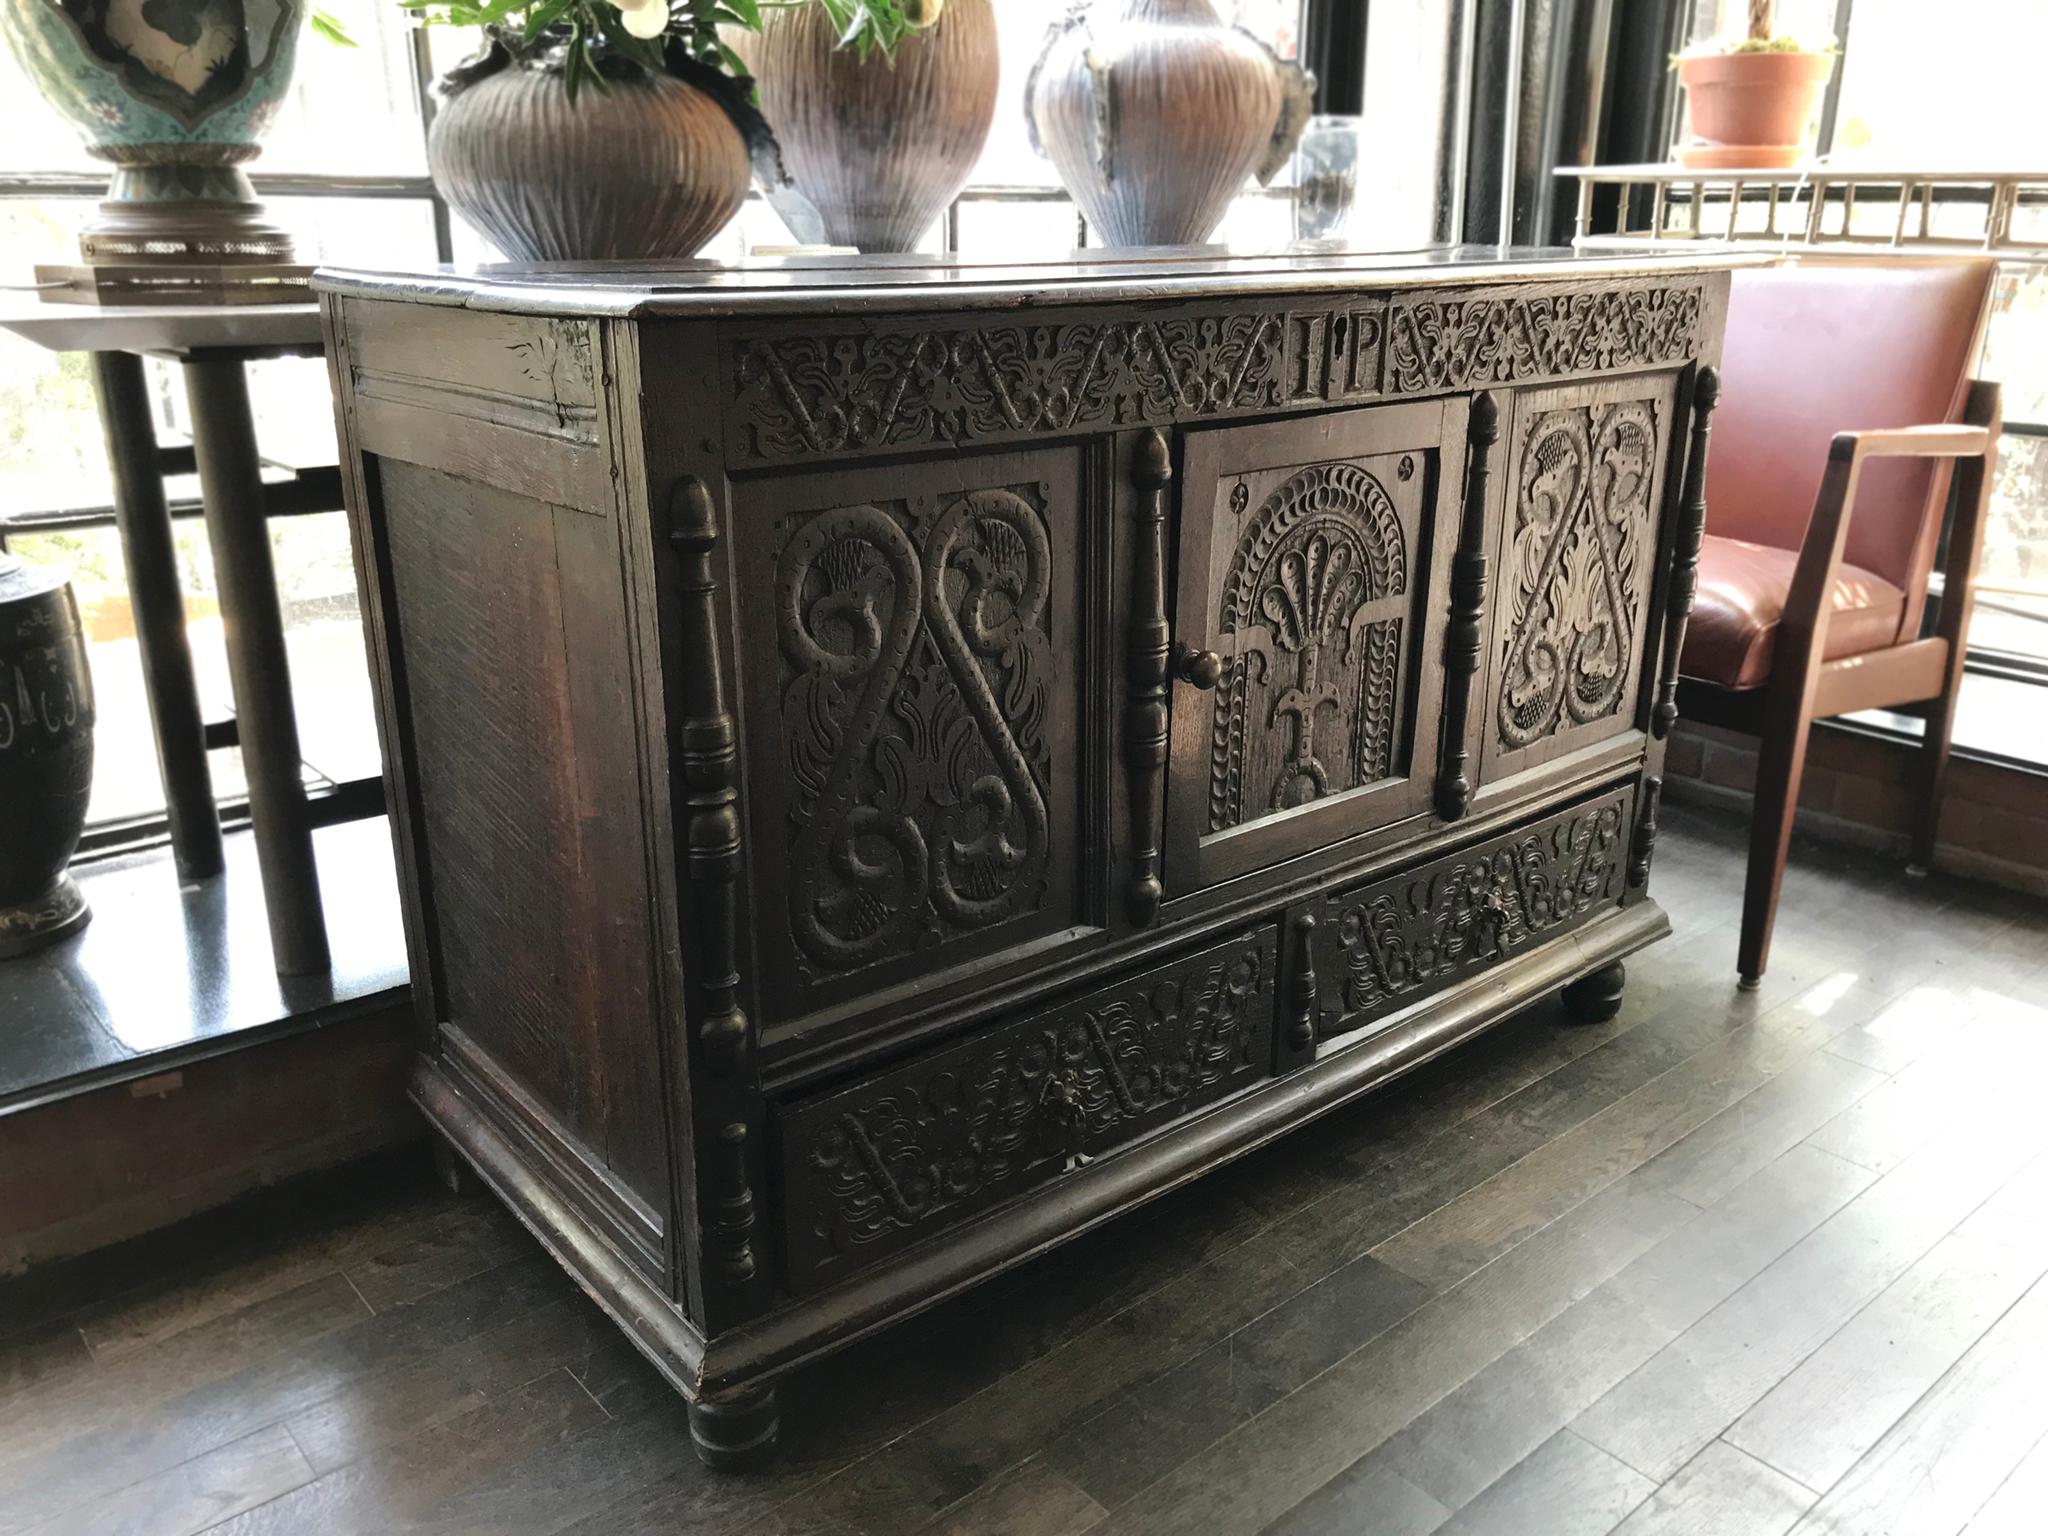 An exquisite, antique cabinet-chest or Pilgrim's trunk, circa 17th-18th century. It is comprised of black oak. The decorative elements are beautifully carved on the front door and drawers. These include ornate floral and arboreal patterns framed by